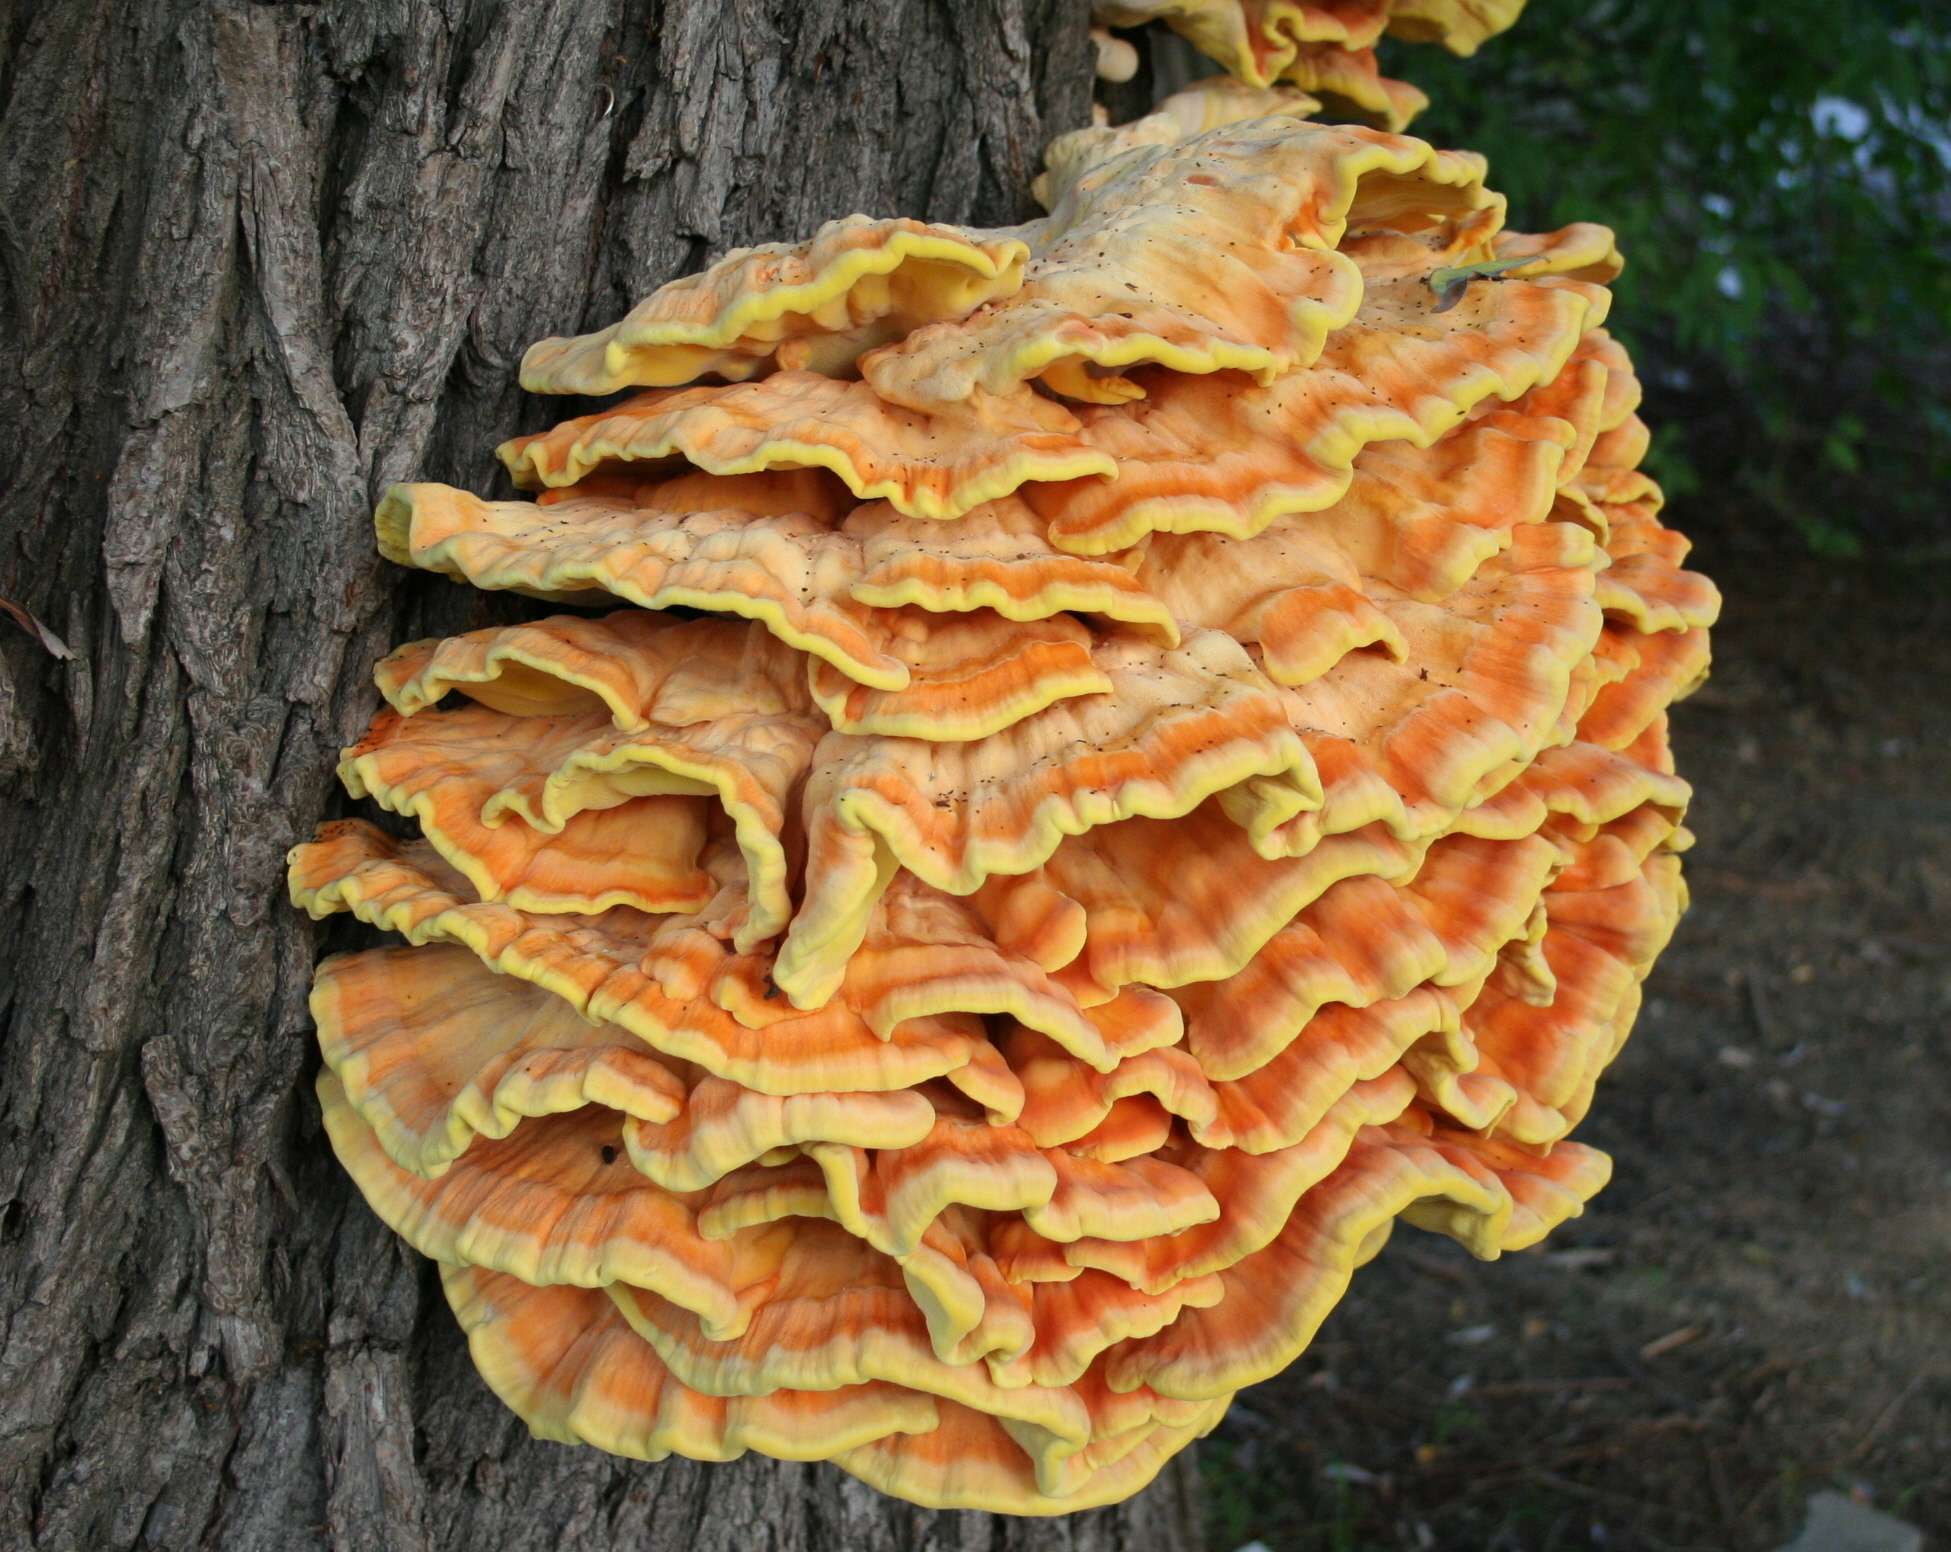 Chicken of the Woods.